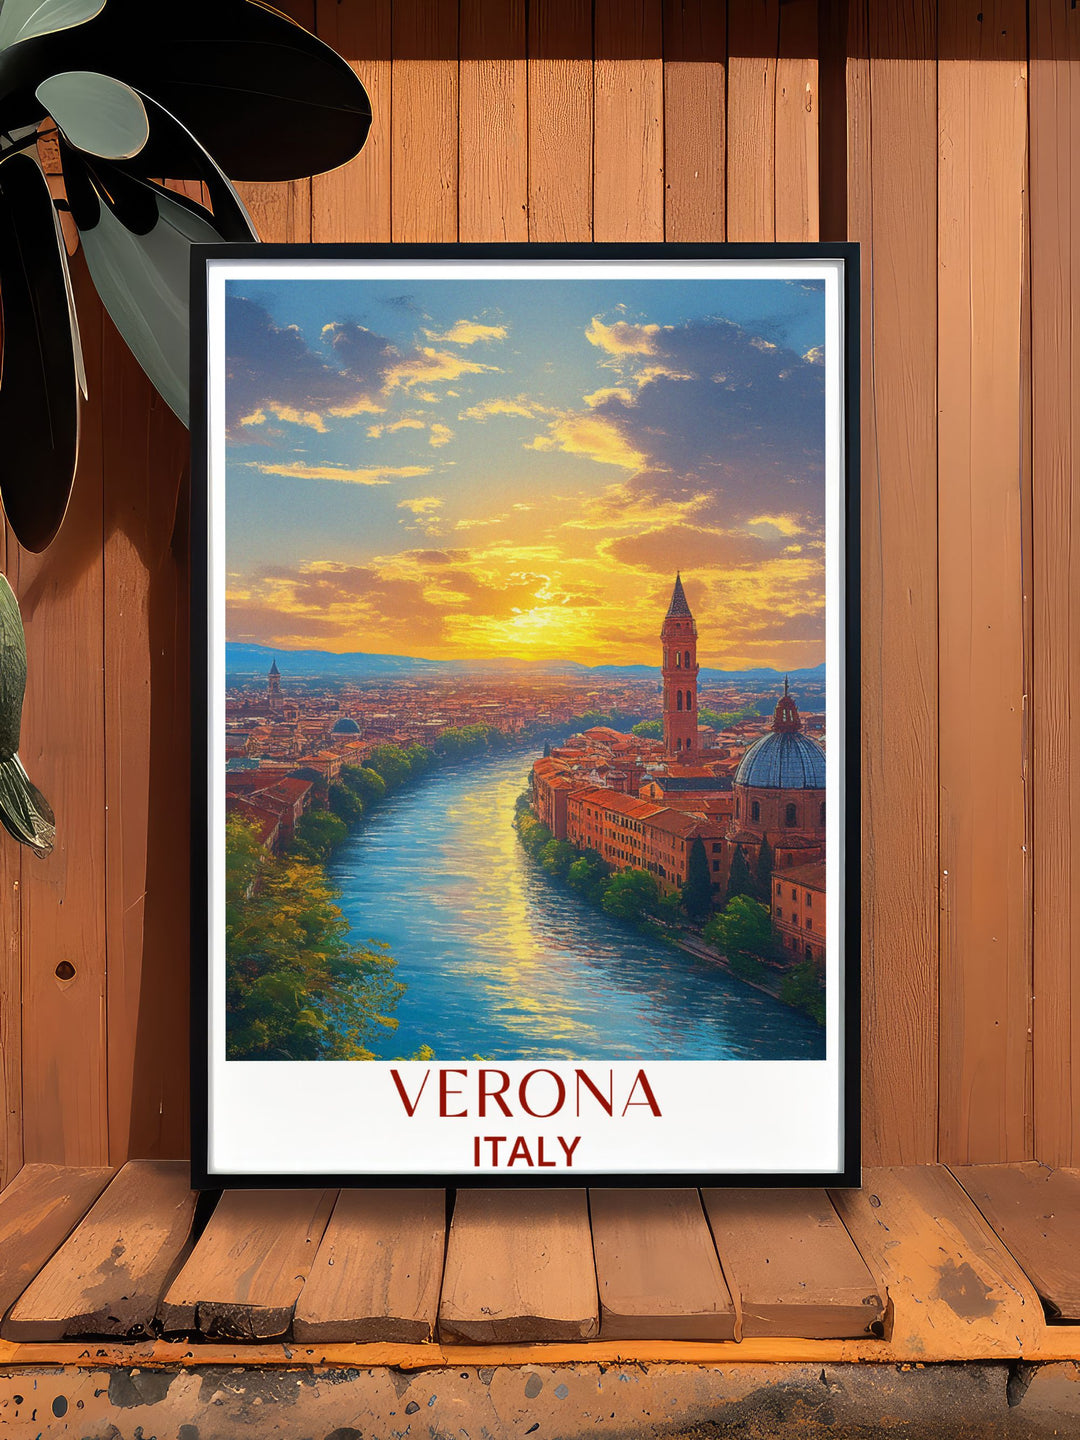 Celebrate Veronas rich history and architectural beauty with this travel print. The intricate details and vibrant colors depict the panoramic views from Castel San Pietro and the citys enchanting streets, perfect for adding elegance to your decor.